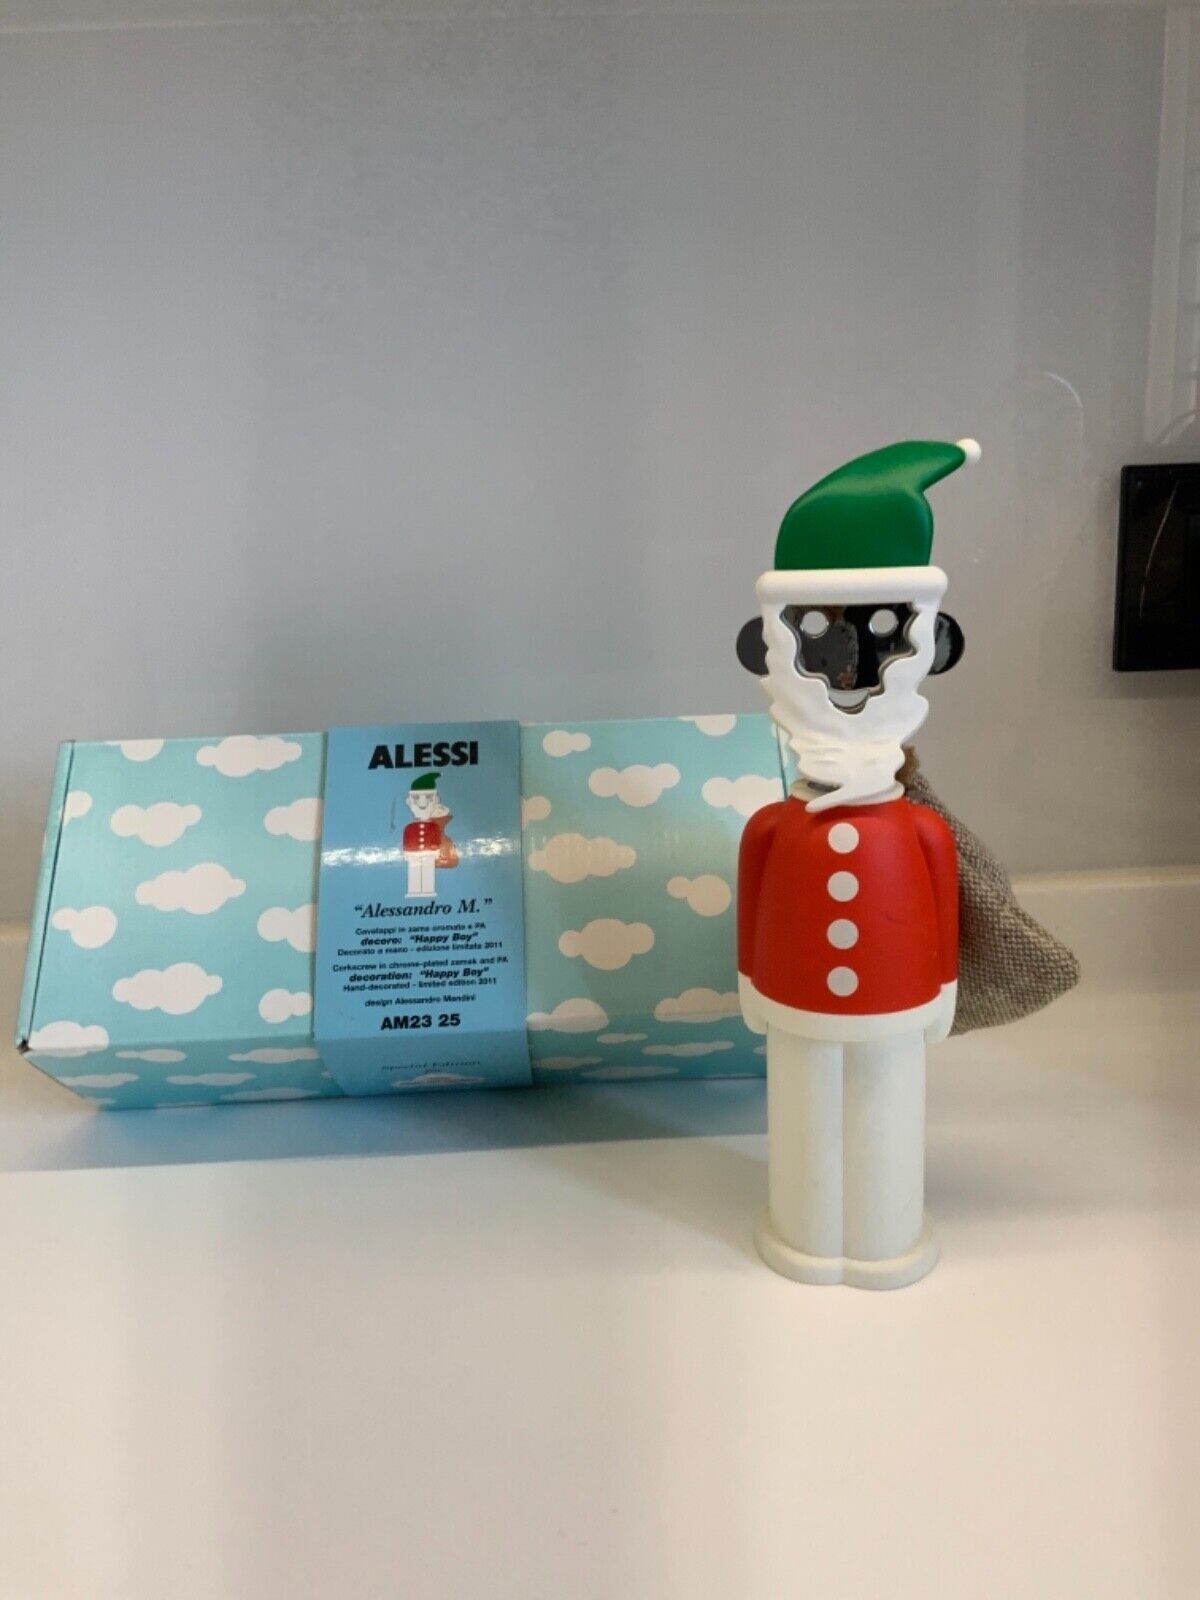 Alessi limited Alessandro M (Santa 2) limited 2011